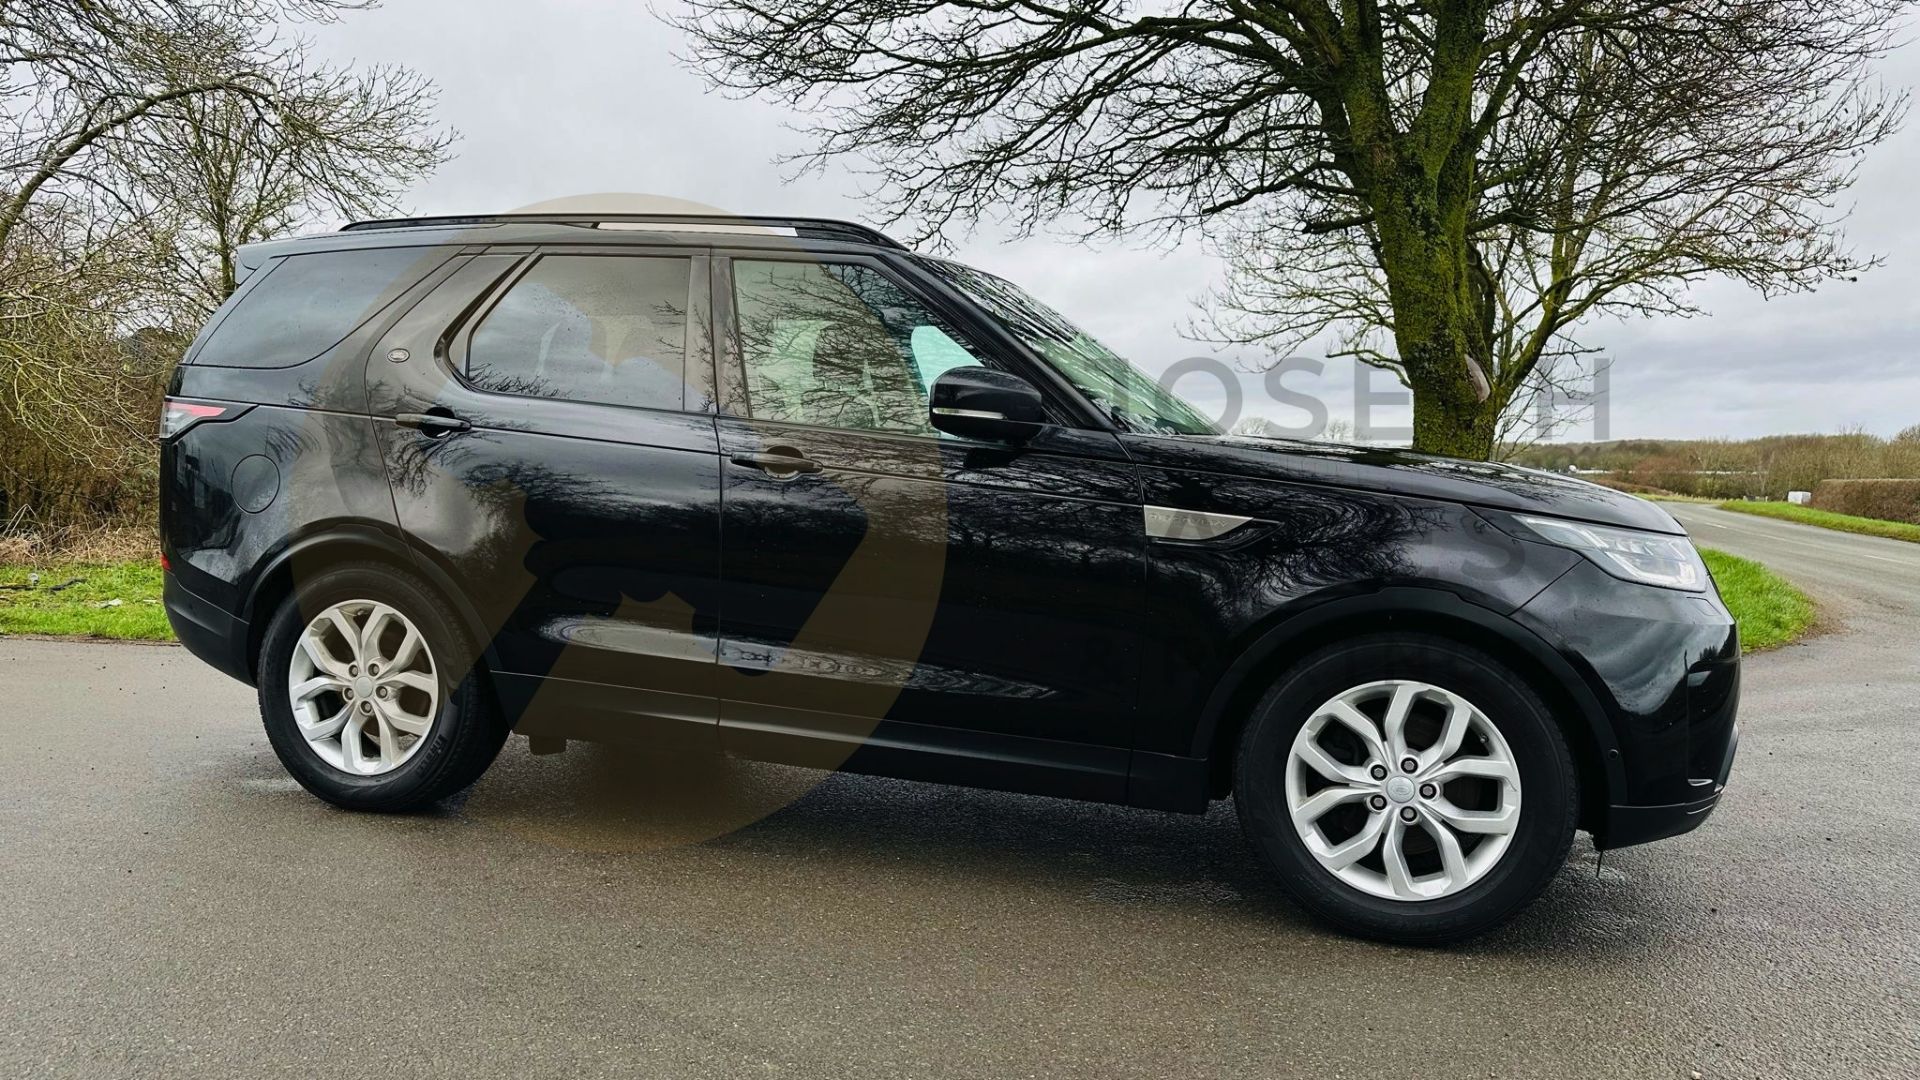 LAND ROVER DISCOVERY 5 *SE EDITION* 7 SEATER SUV (2020 - EURO 6 DIESEL) 8 SPEED AUTO *HUGE SPEC* - Image 2 of 57